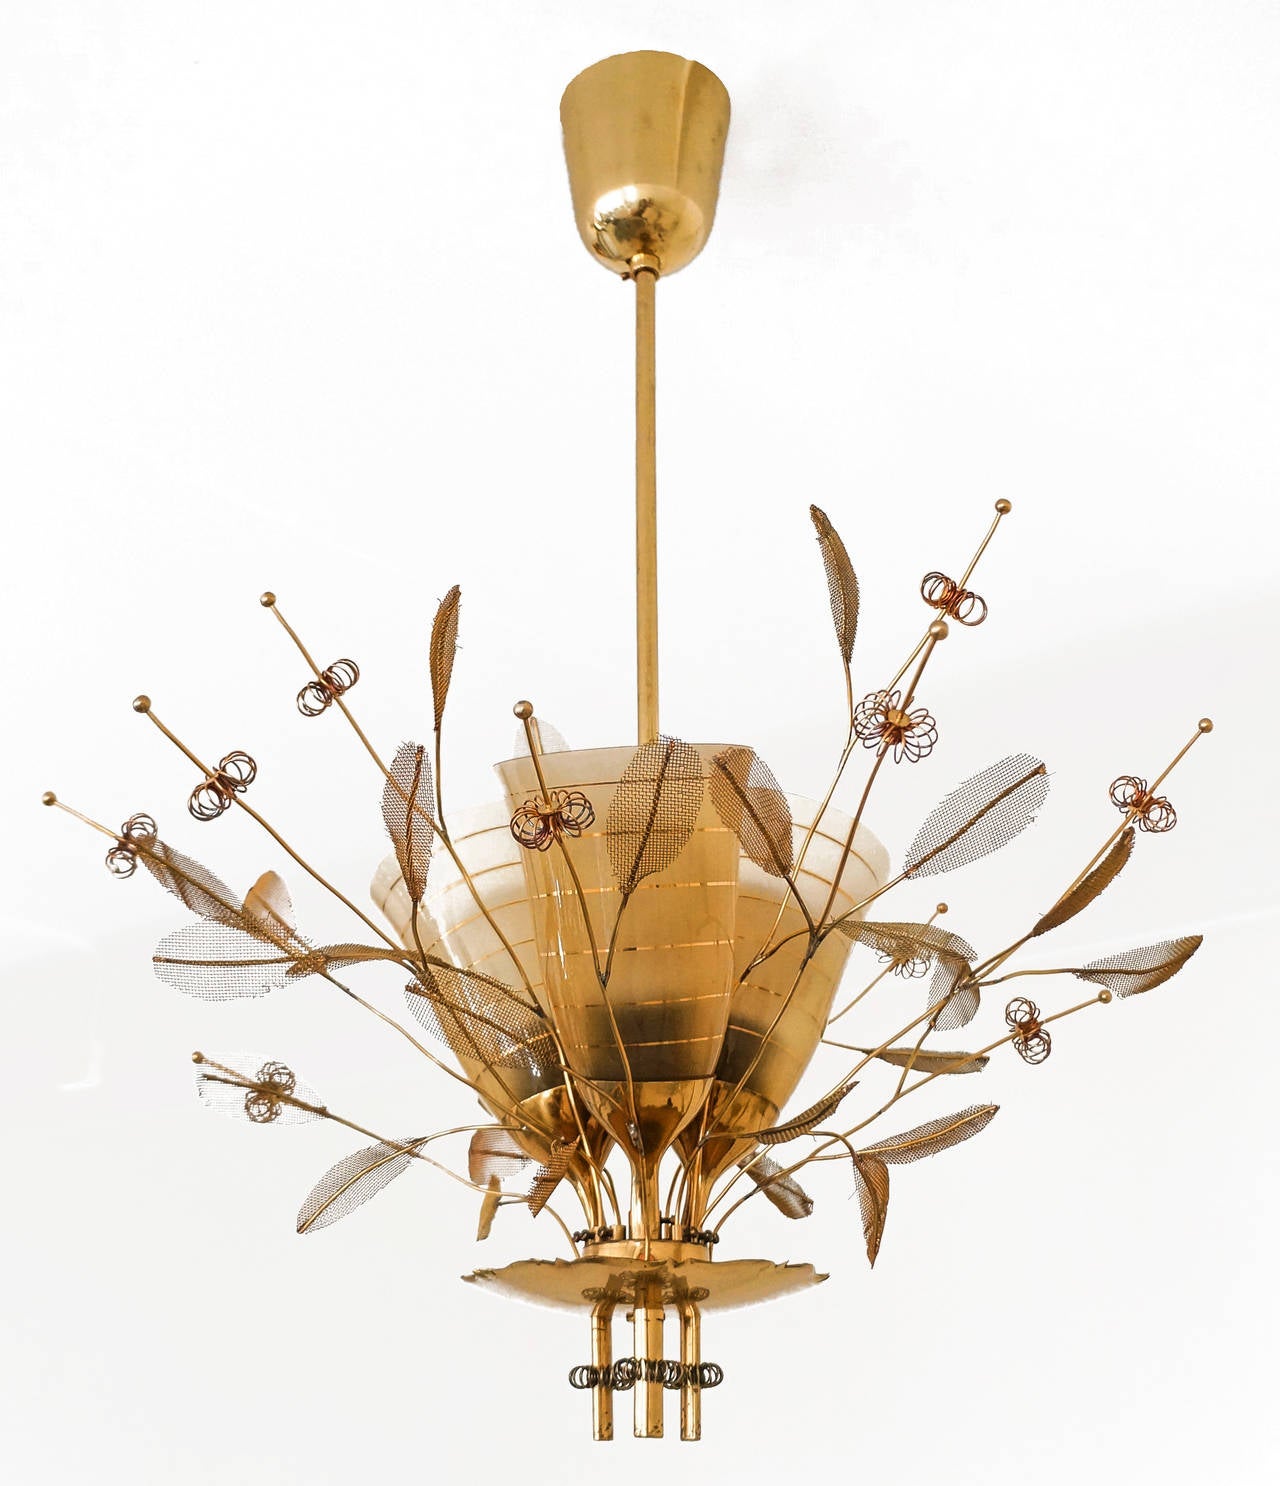 Paavo Tynell.

Ceiling lamp, model nr. 9029 / 3.

Oy Taito Ab,
late 1940s-early 1950s, Helsinki, Finland.

Solid brass, metal, metal mesh, glass.
Measures: Height circa 70.0 cm x width circa 50 cm.

Original custom ordered gold gilded glass shade